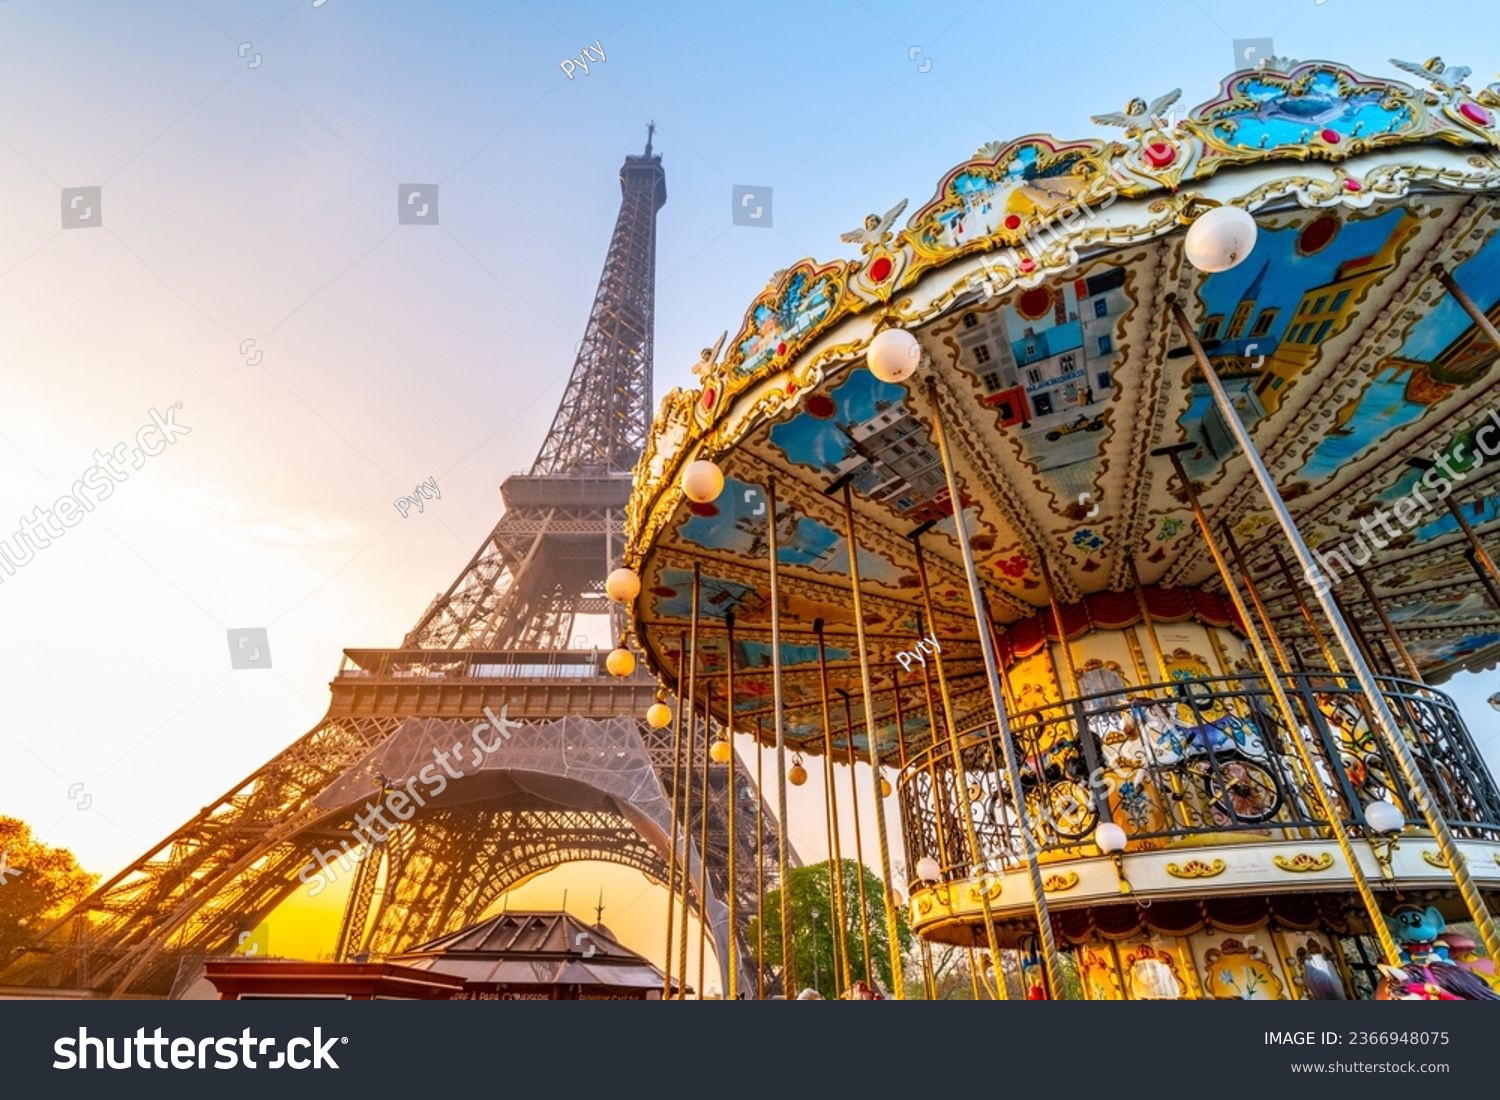 Historical Carousel of the Eiffel Tower. Morning photography at sunrise time. Paris, France #2366948075